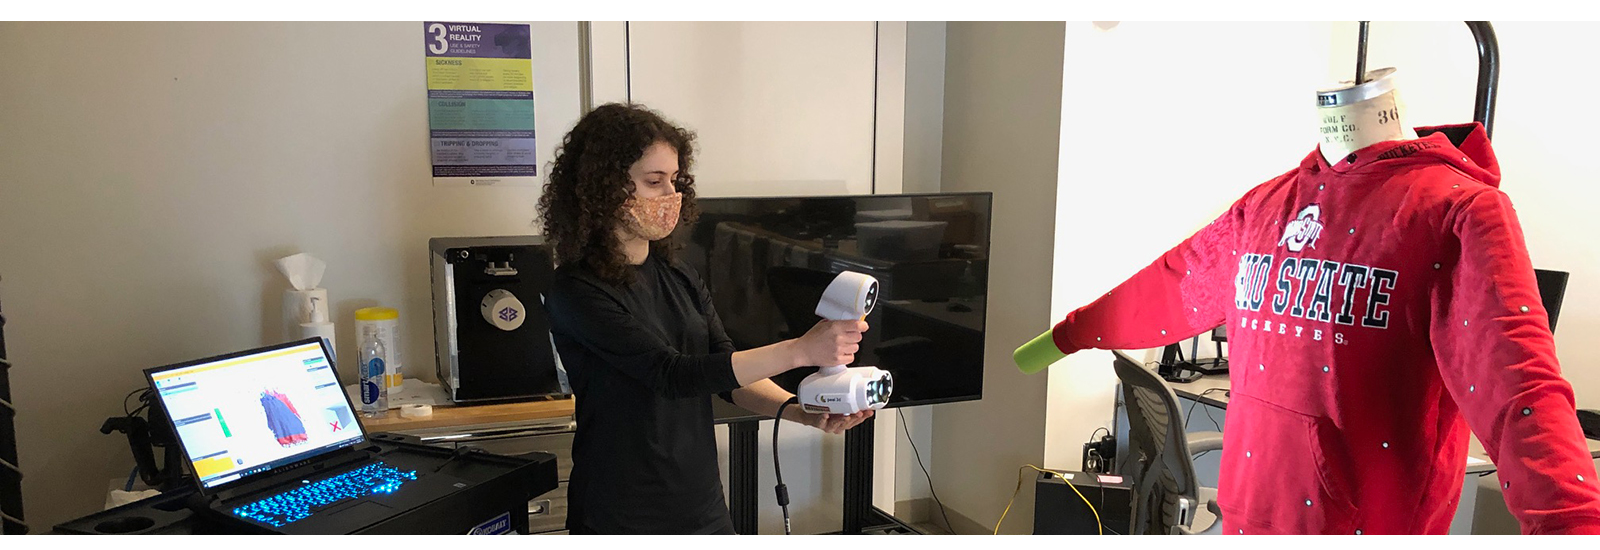 ACCAD GRA and first year Design graduate student Mila Gajic uses the PEEL 2 3d scanner to capture new clothing items for virtual avatars